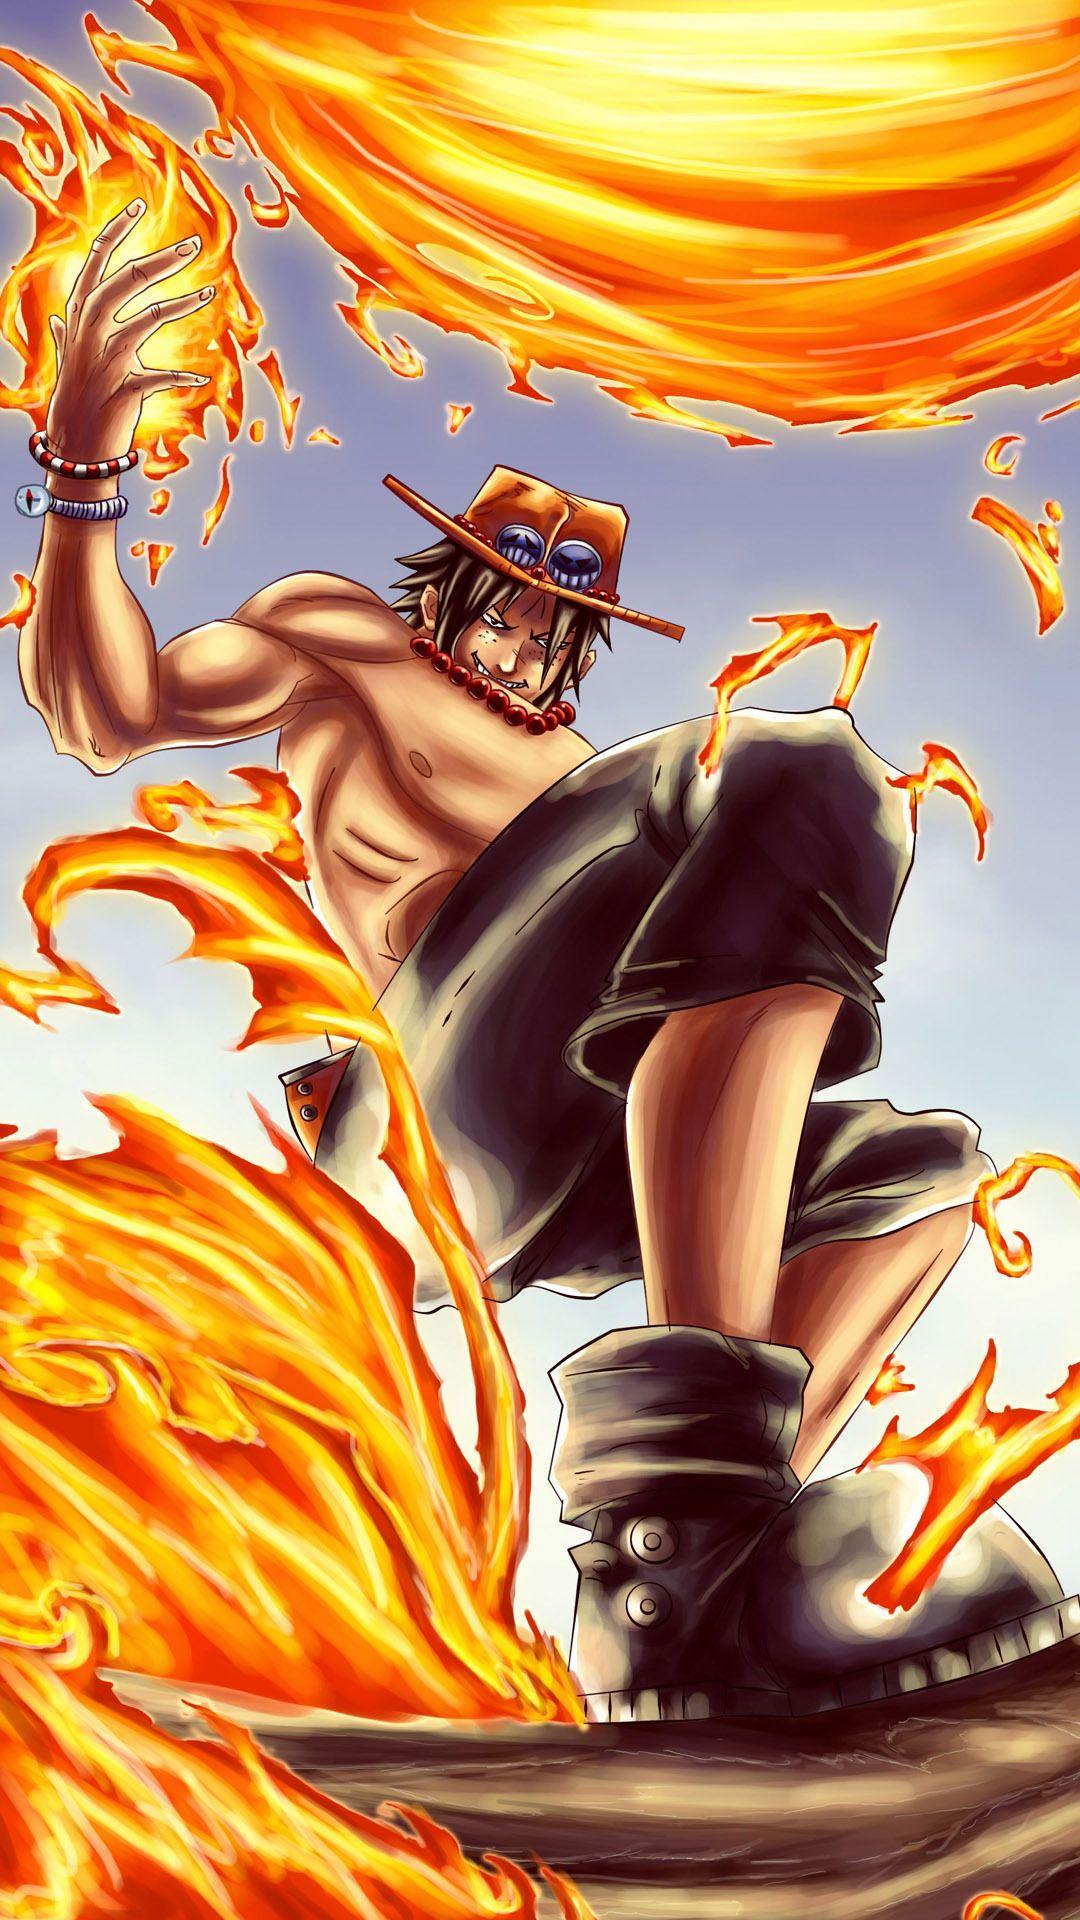 Ace One Piece iPhone Wallpapers - Top Free Ace One Piece iPhone Backgrounds  - WallpaperAccess